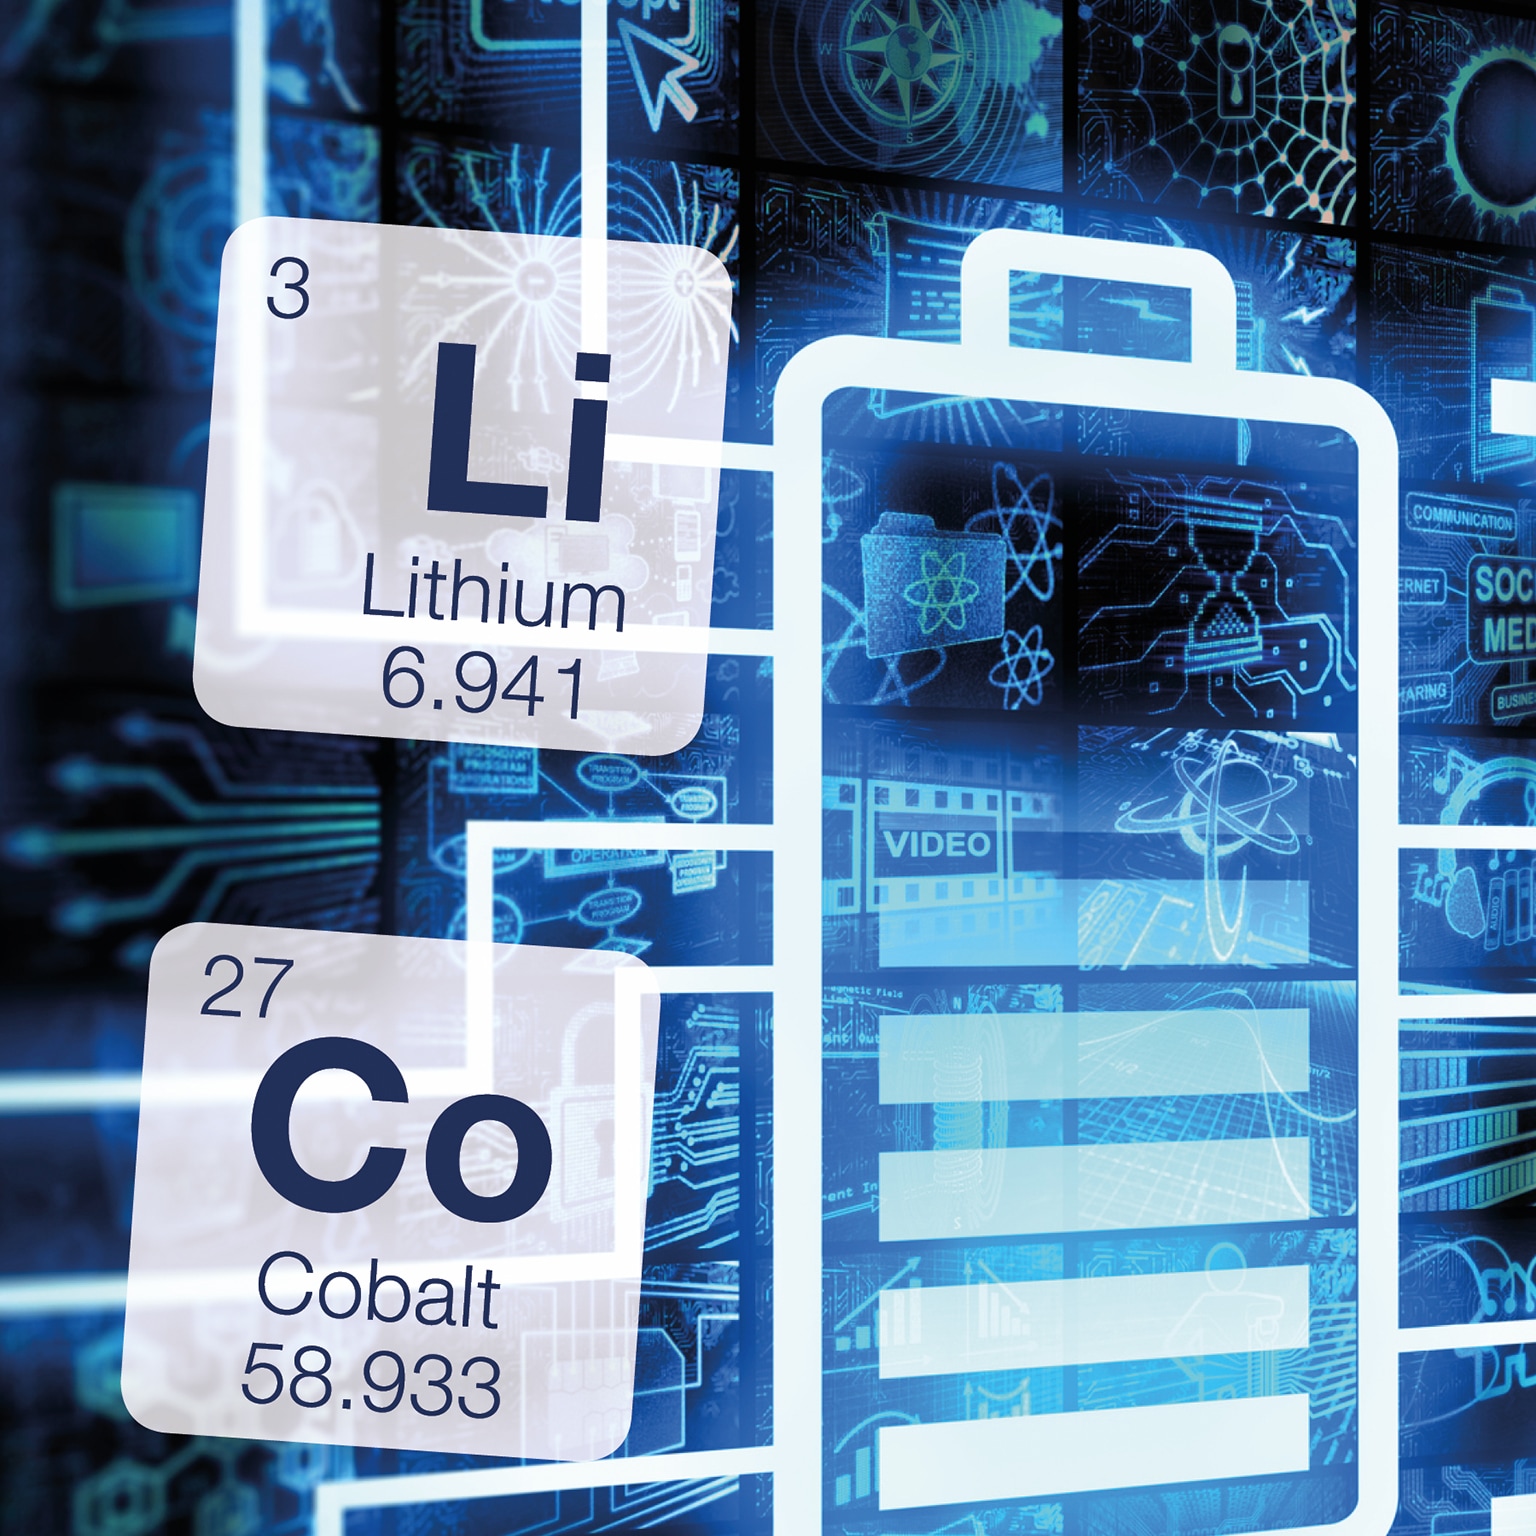 https://www.mckinsey.com/~/media/mckinsey/industries/metals%20and%20mining/our%20insights/lithium%20and%20cobalt%20a%20tale%20of%20two%20commodities/lithium-and-cobalt-1536x1536-0.jpg